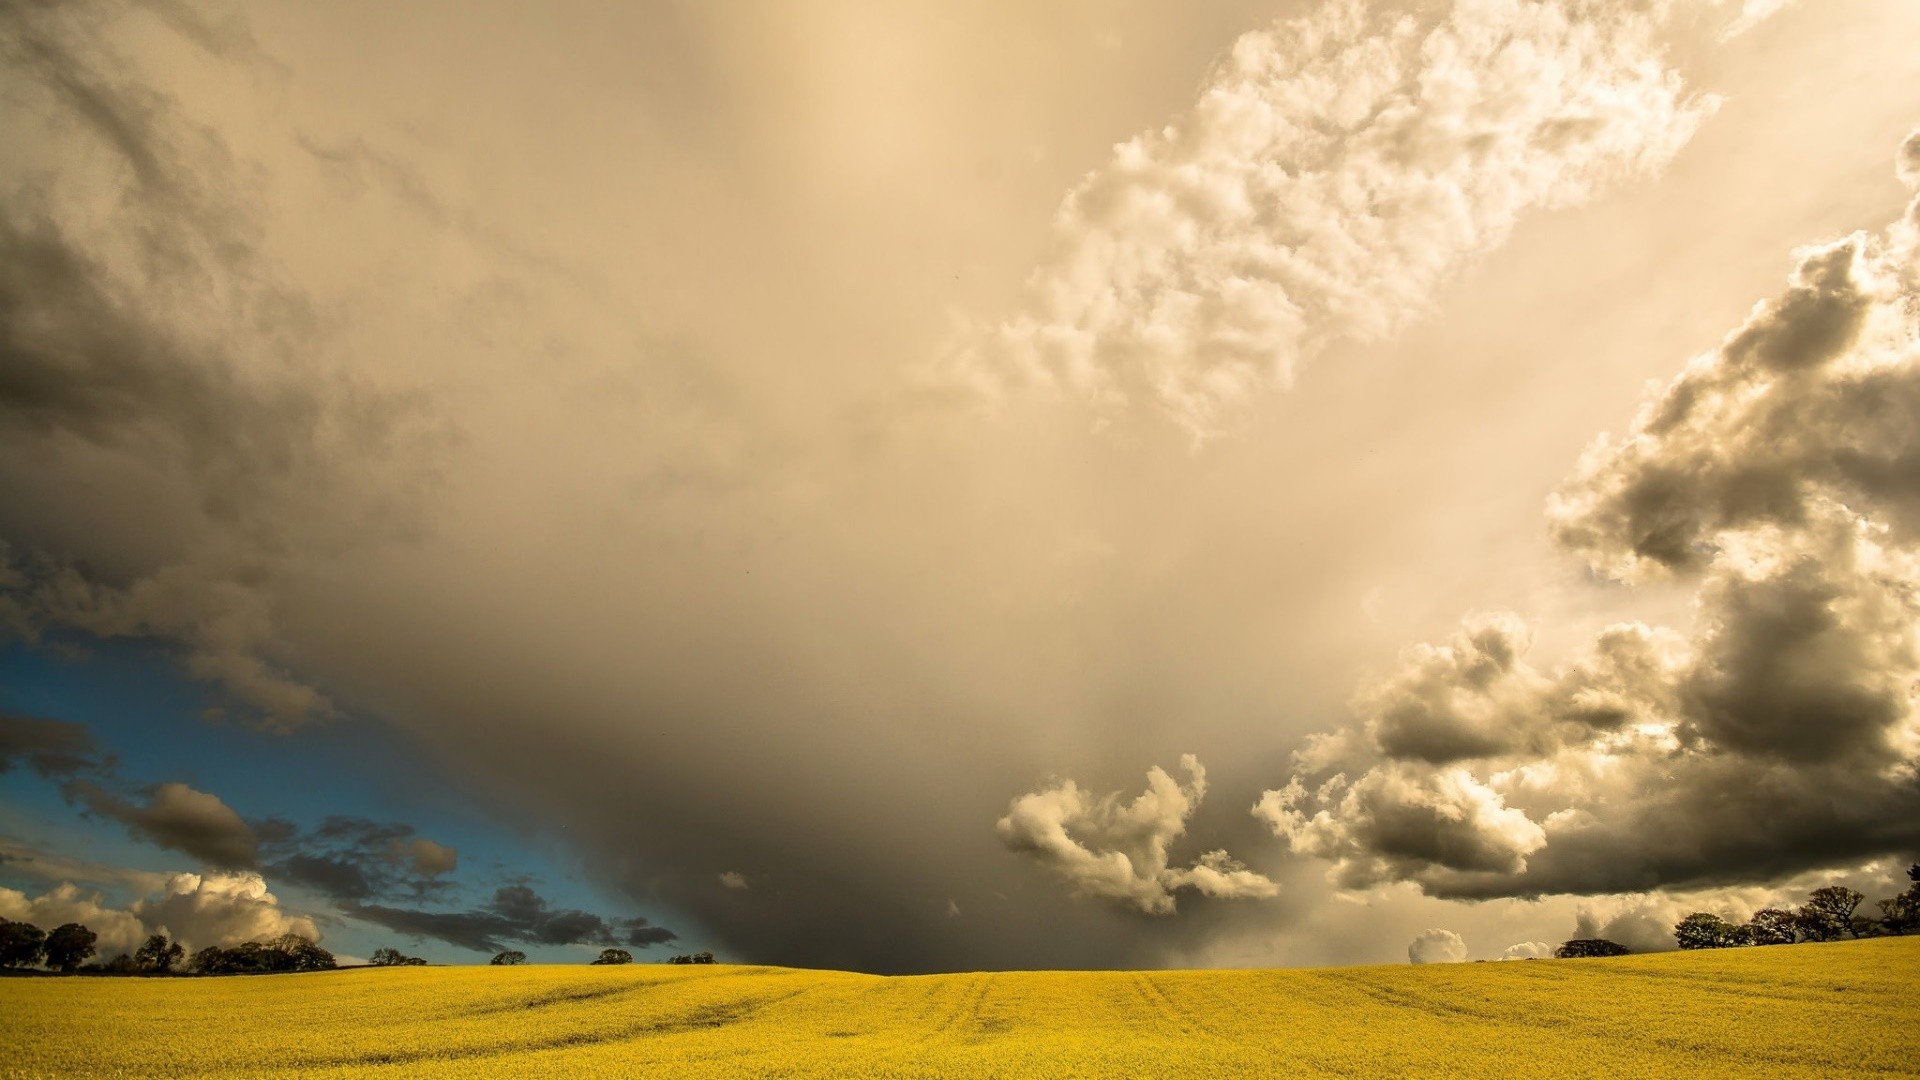 General 1920x1080 sky clouds field nature landscape yellow